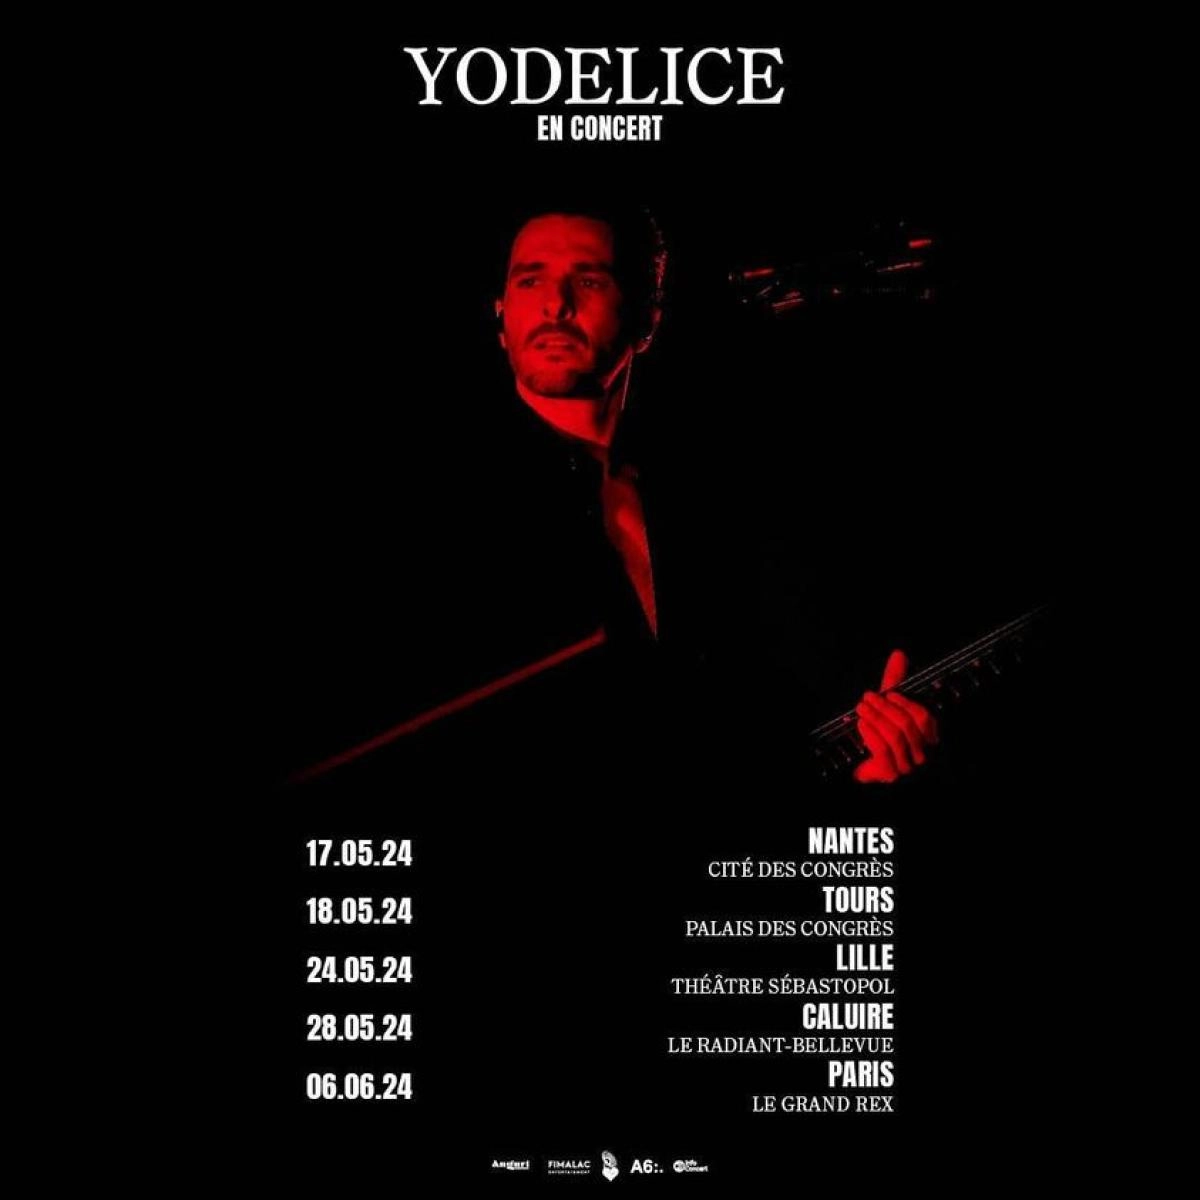 Yodelice at Le Grand Rex Tickets